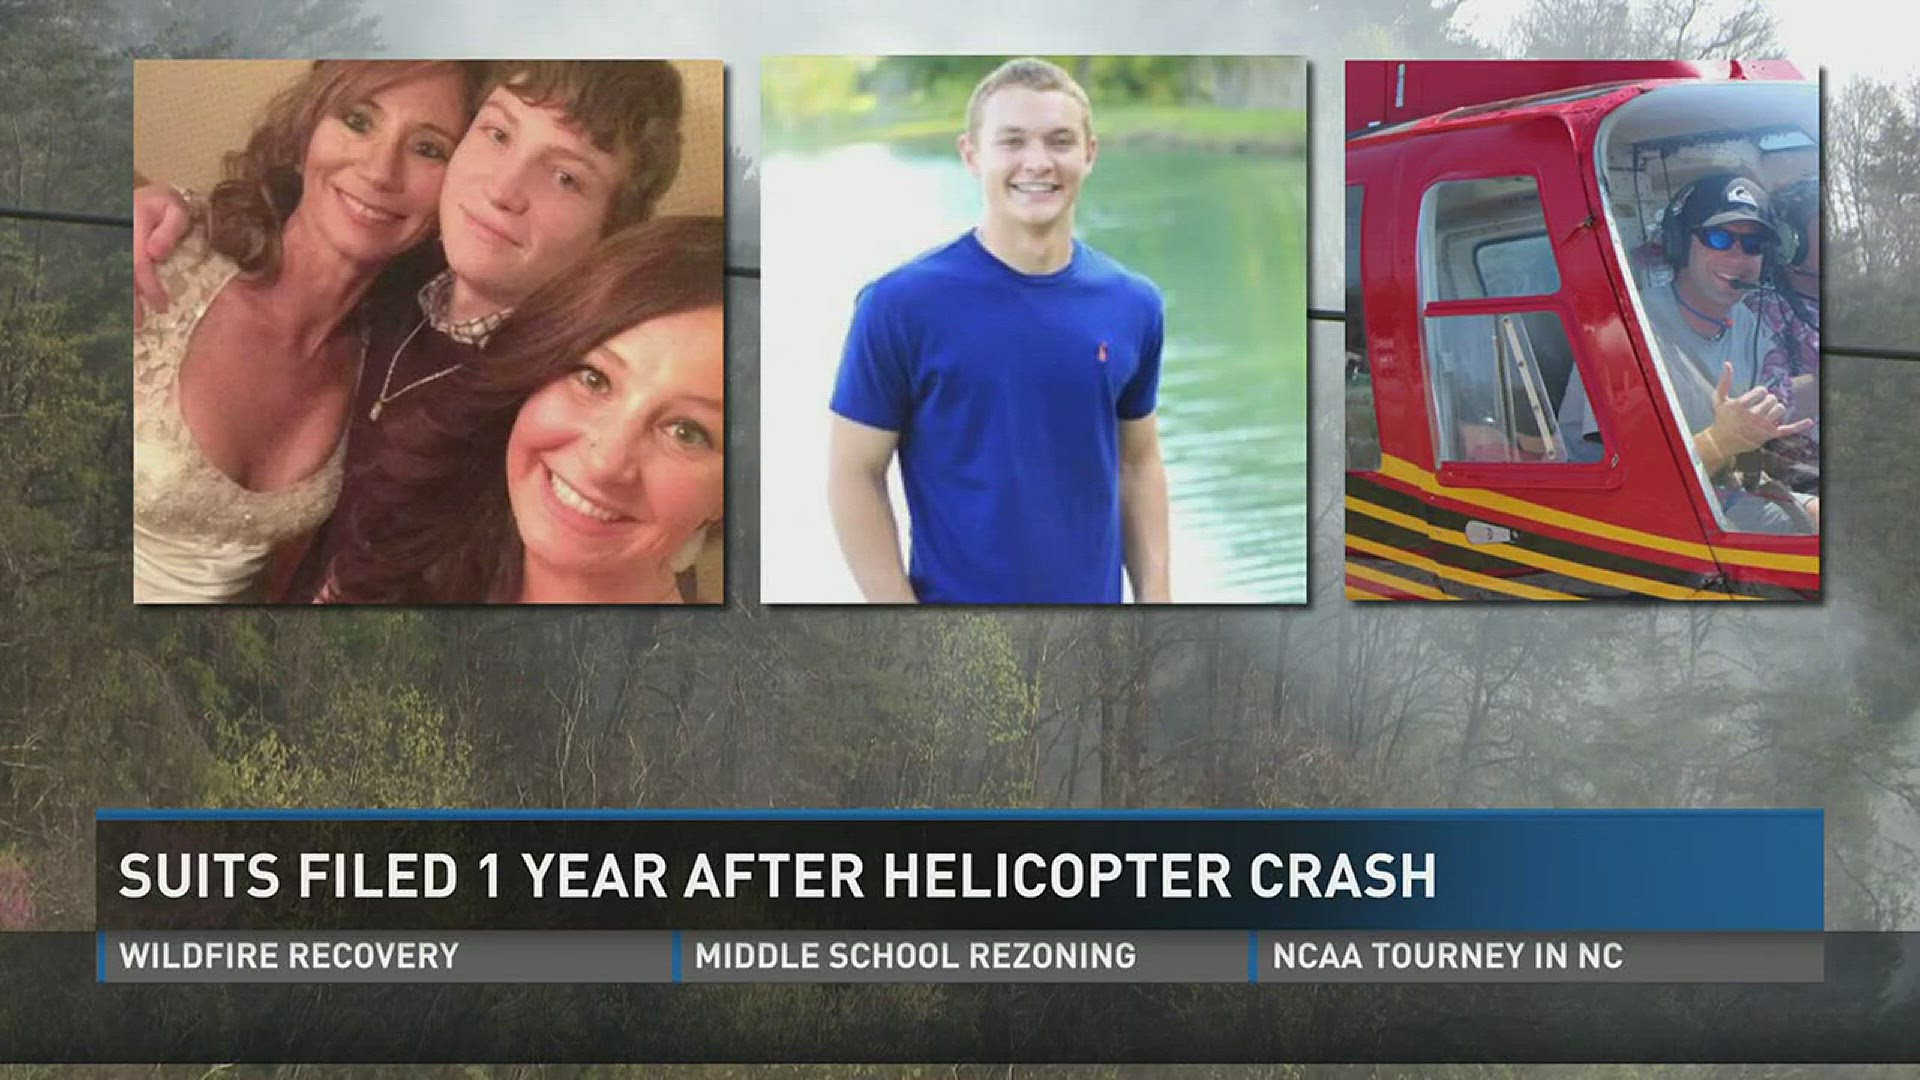 Two new lawsuits claiming negligence have been filed by family members of victims of a deadly 2016 Sevier County sightseeing helicopter crash.